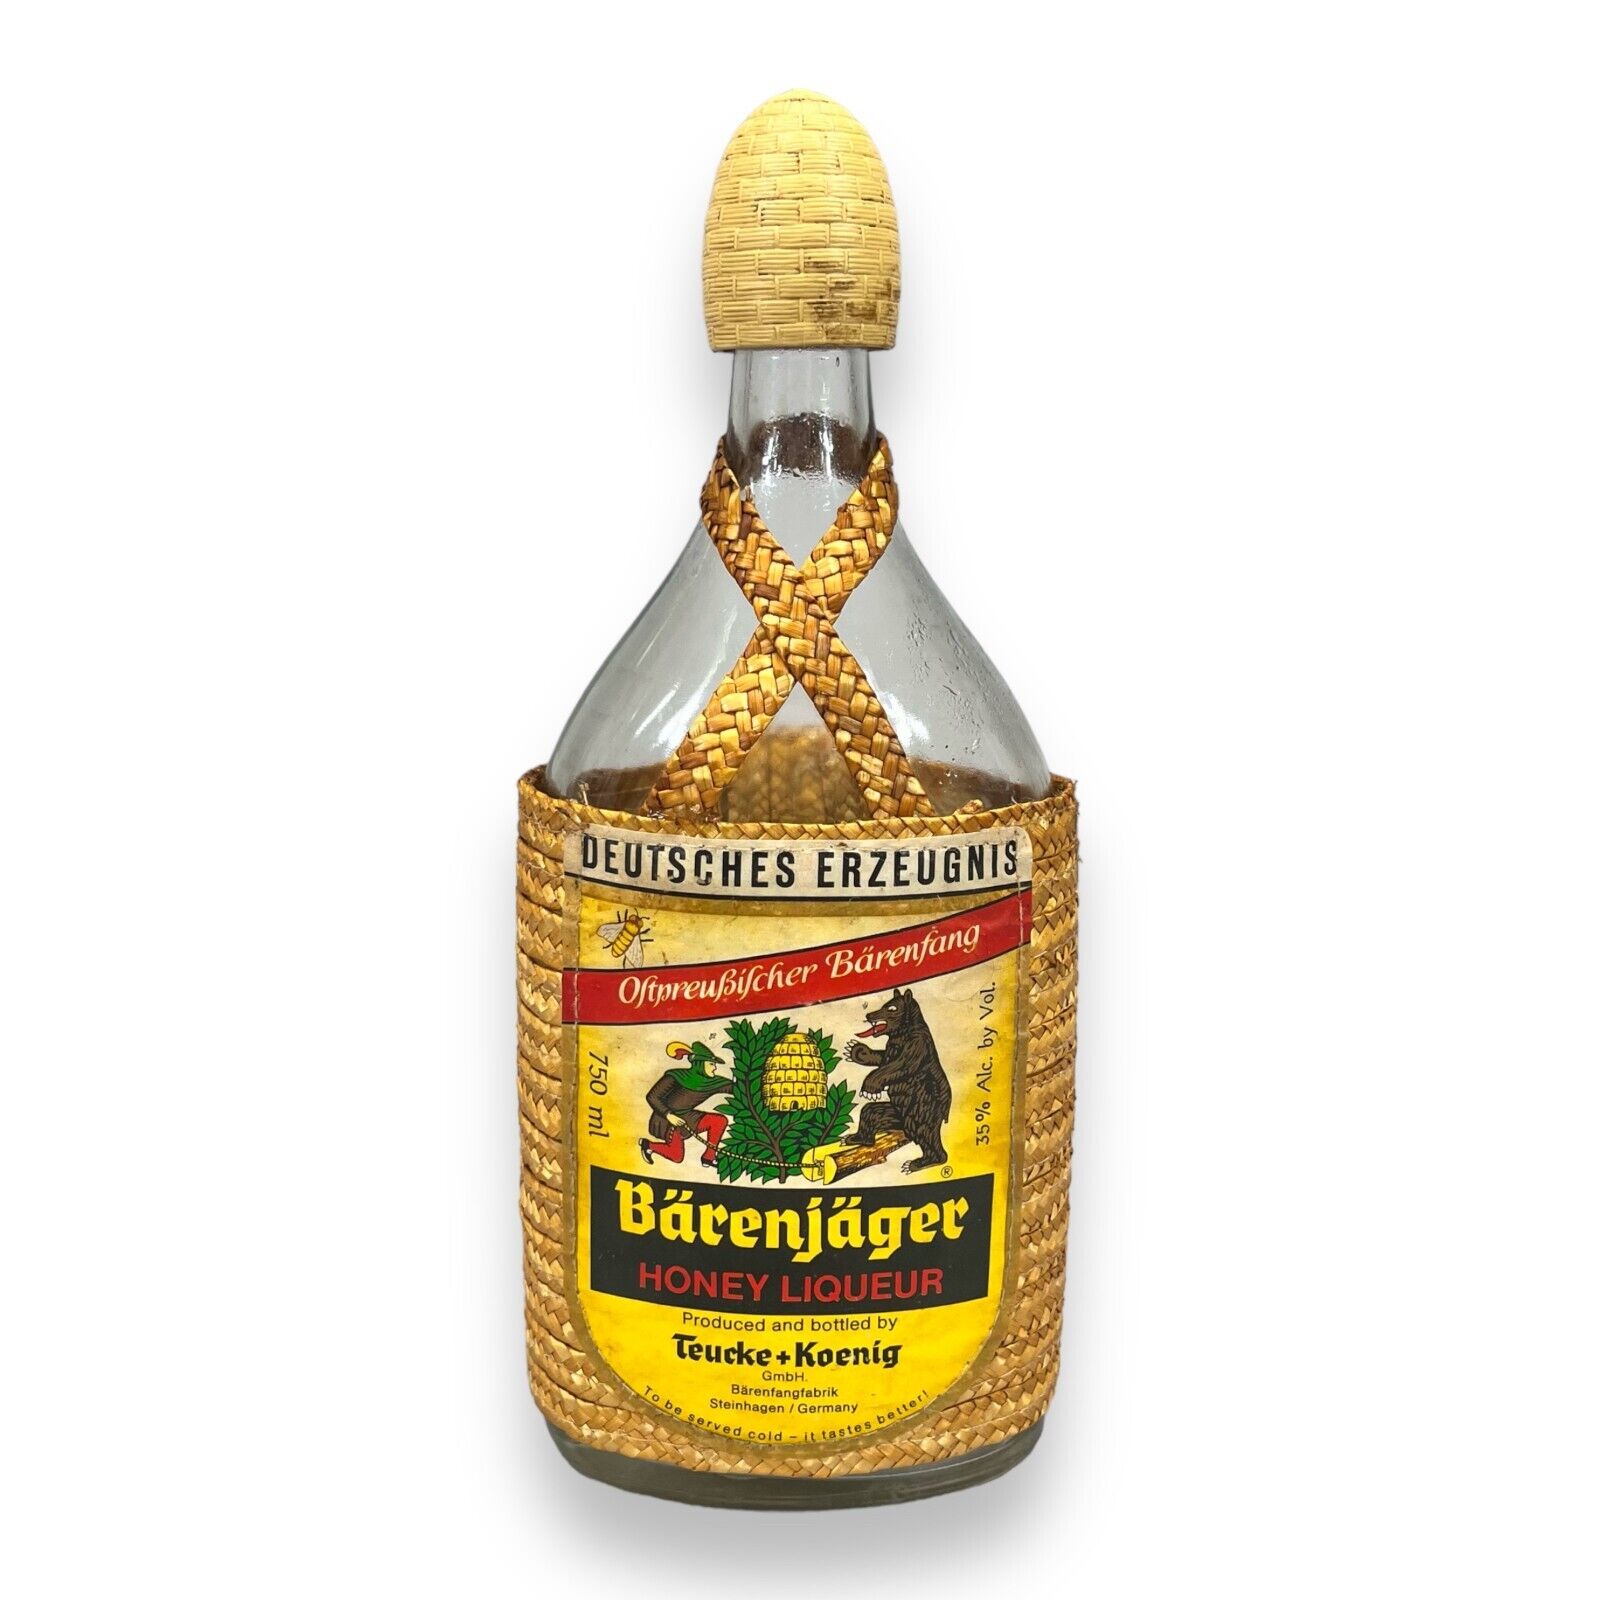 Vintage BarenJager Honey Liqueur Bottle with Woven Straw Wrap 750ml Germany